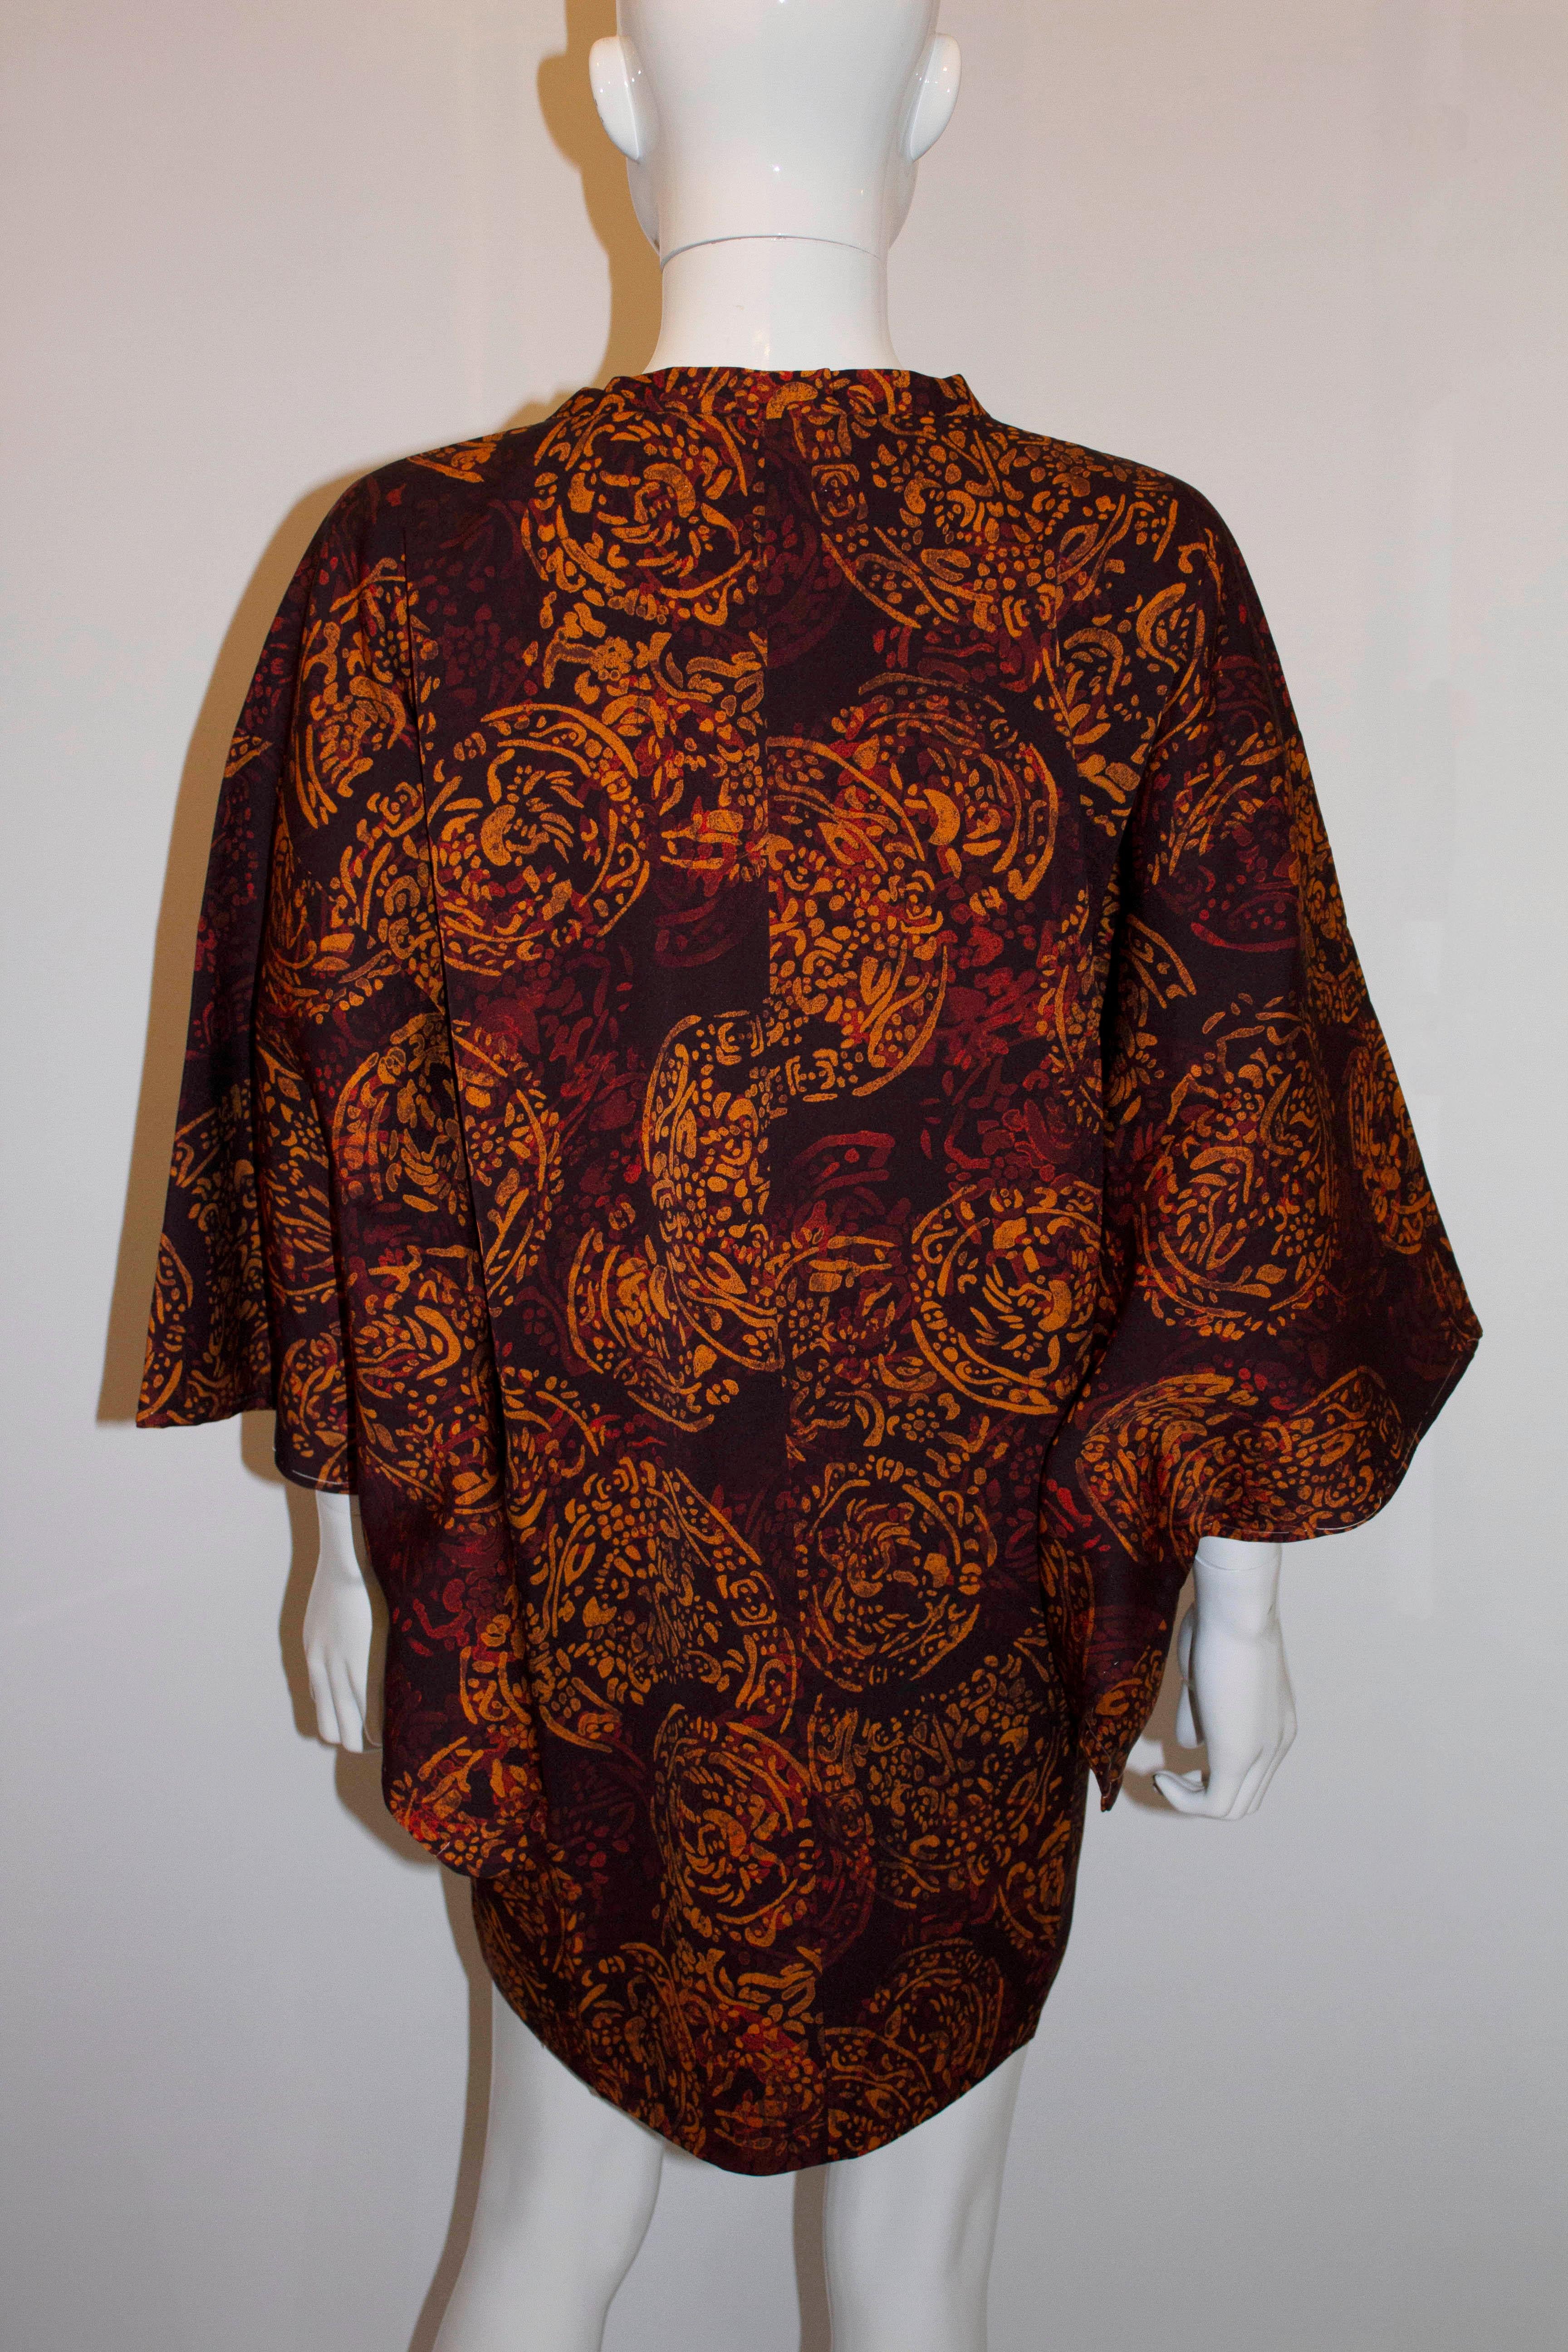 An  interesting vintage short kimono. The kimono has an unusual and interesting print showing ethnic tribal objects, possibly created  as a response to a Western exhibition in Japan. The kimono has a square neckline, internal waist ties and and